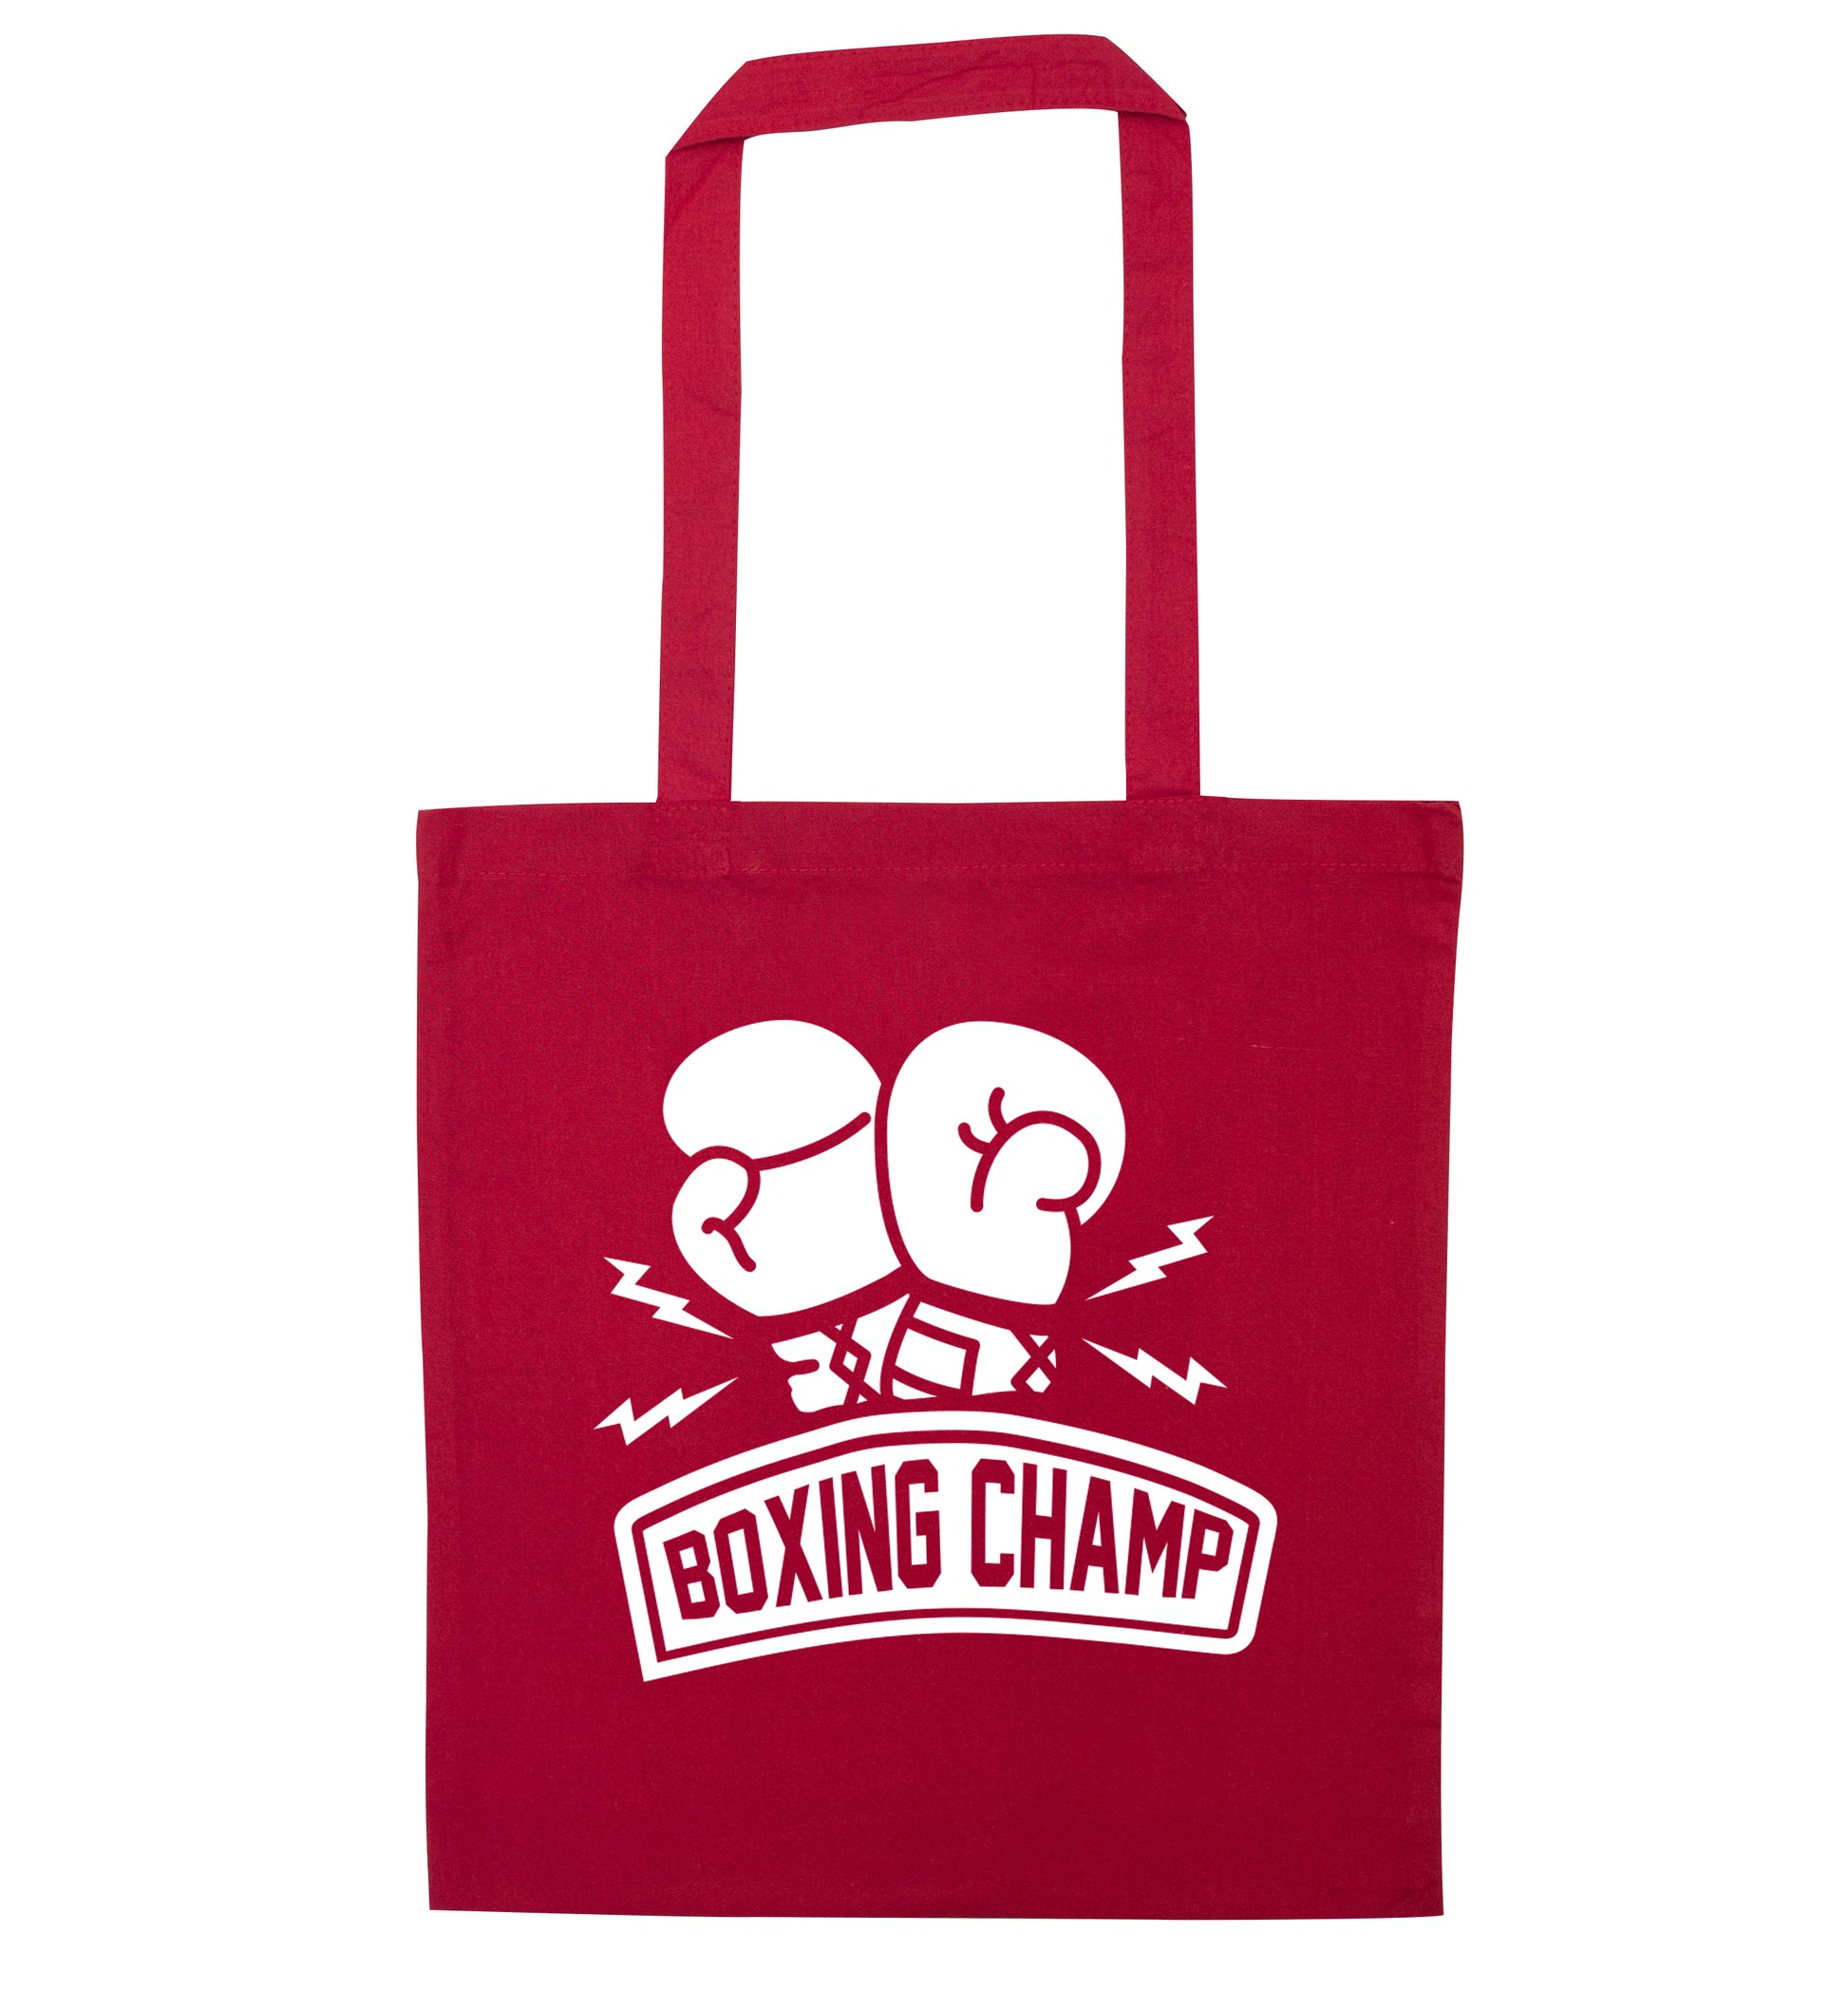 Boxing Champ red tote bag